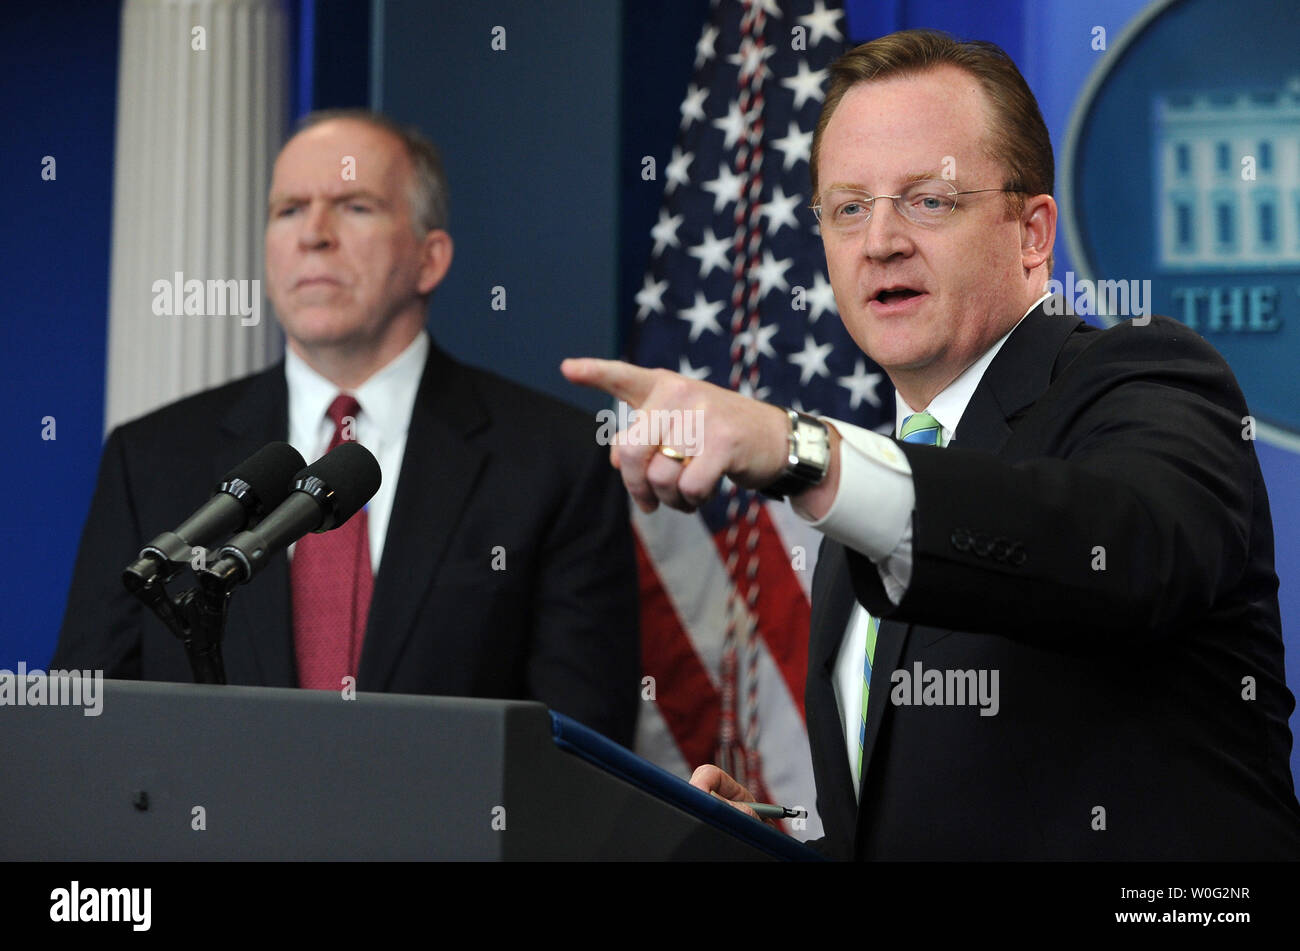 Assistant to the President for Homeland Security and Counterterrorism John Brennan (L) and White House Press Secretary Robert Gibbs discuss bomb material found on cargo planes in the Brady Press Briefing Room of the White House in Washington on October 29, 2010.       UPI/Roger L. Wollenberg Stock Photo